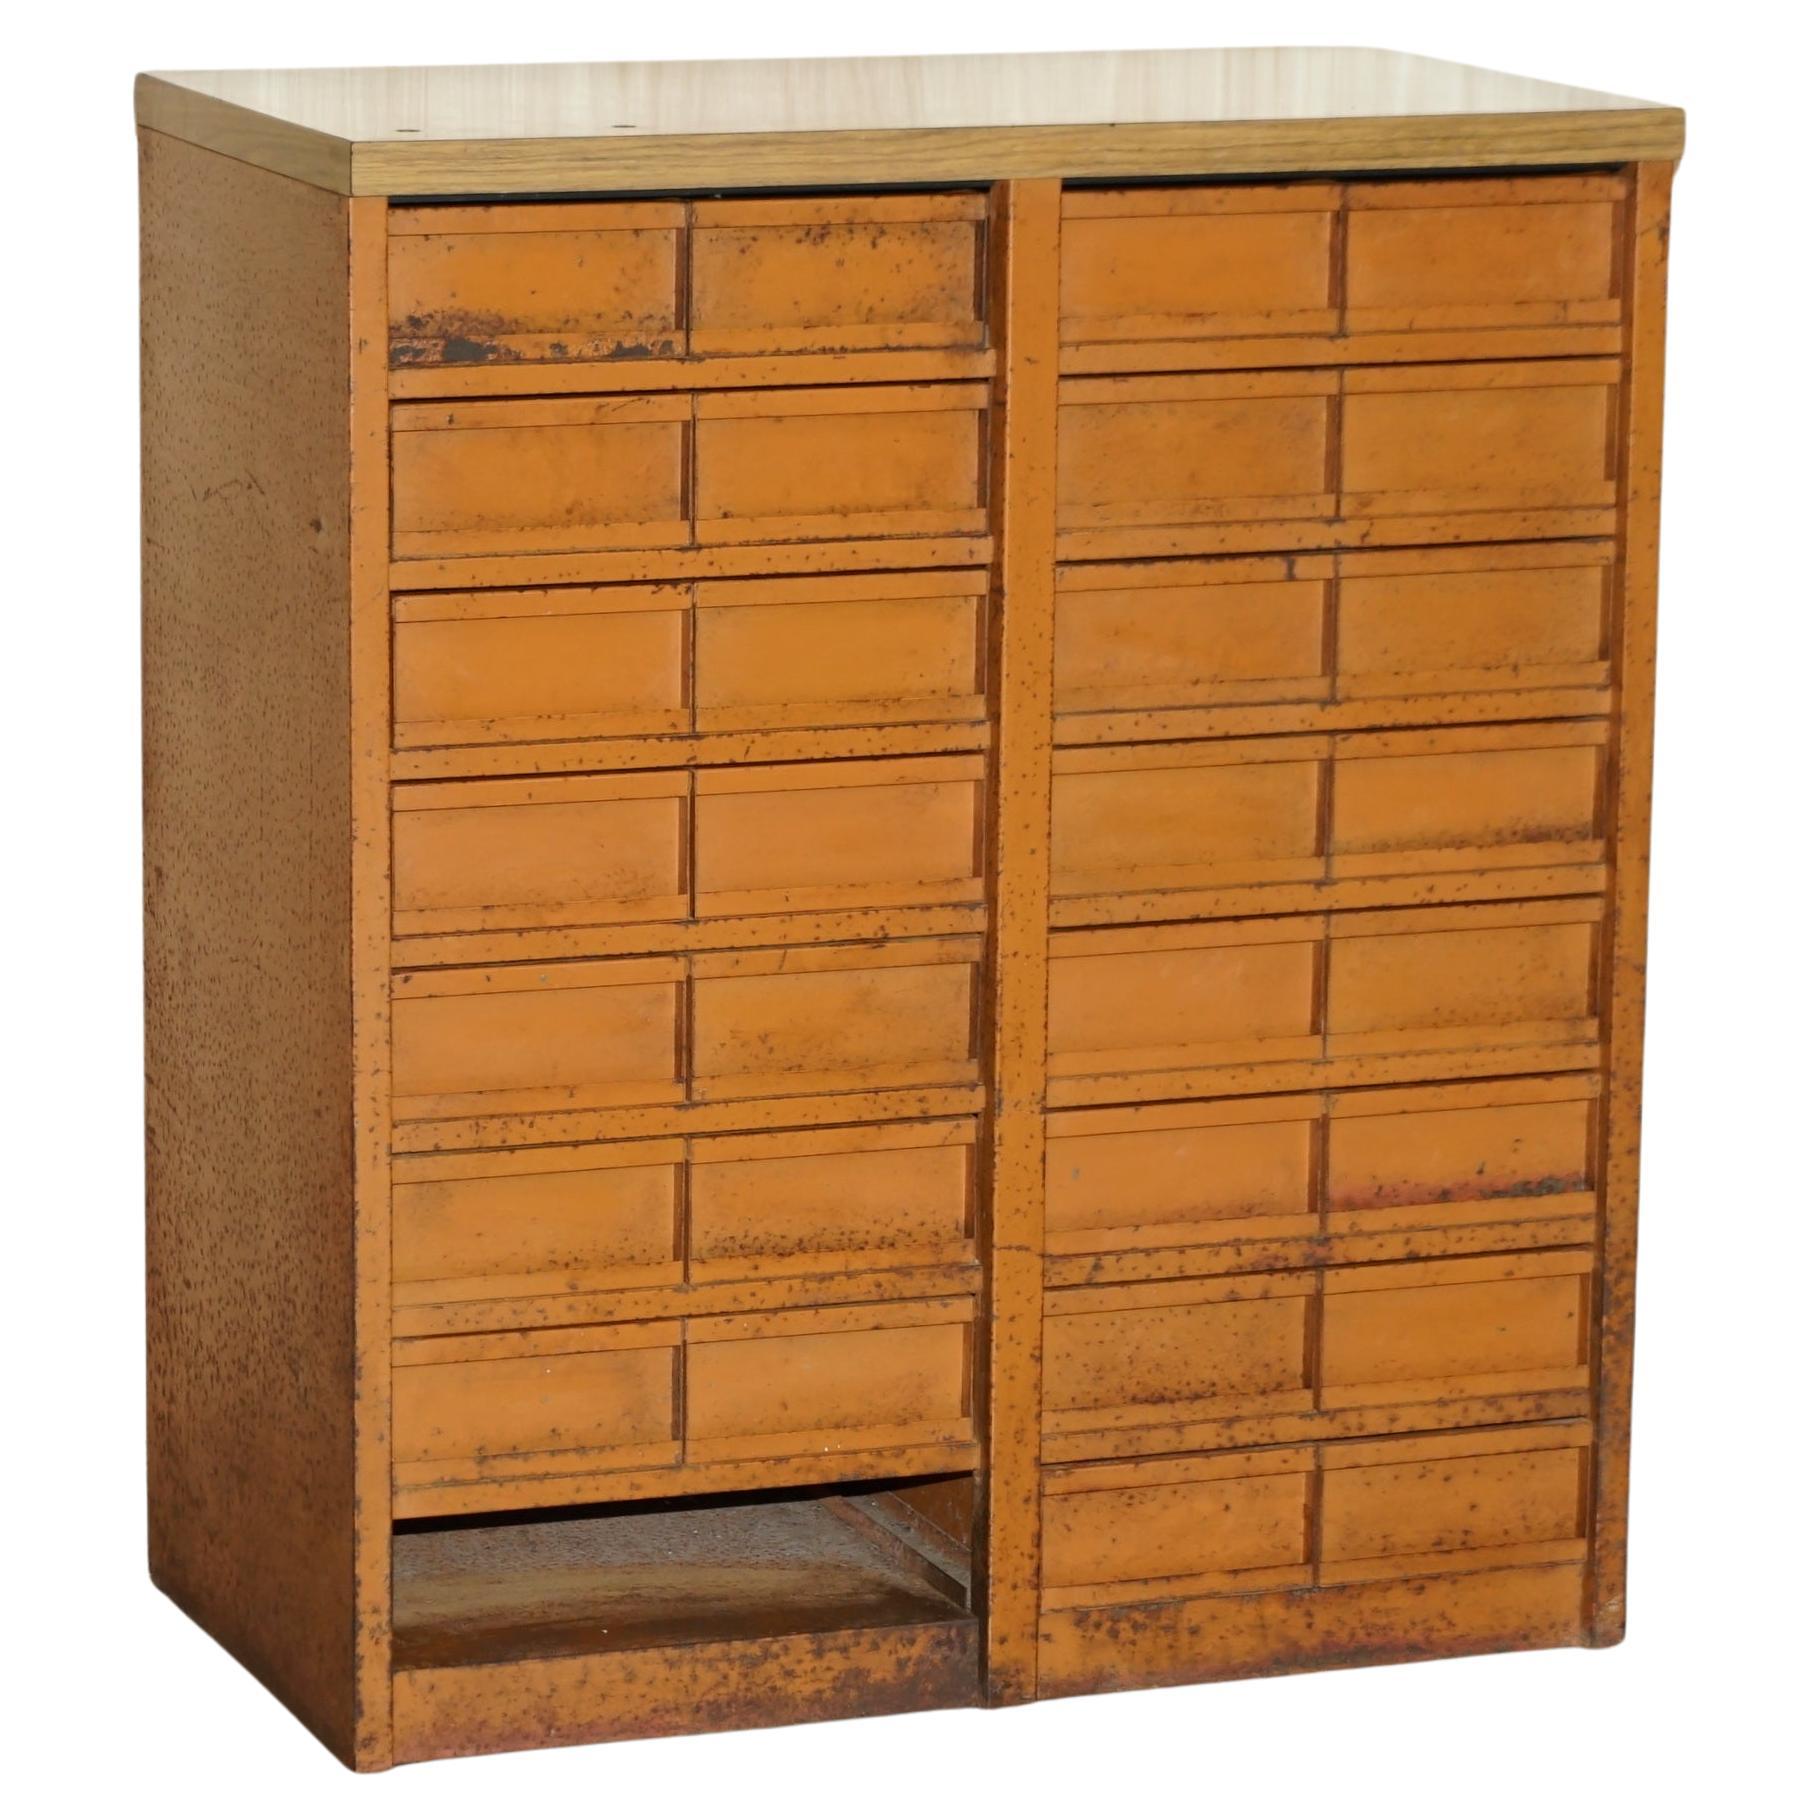 ANTIKE INDUSTRIE-METALLARBEITER CHEST OF DRAWERS FOR SCREWS NUTS AND BOLTs